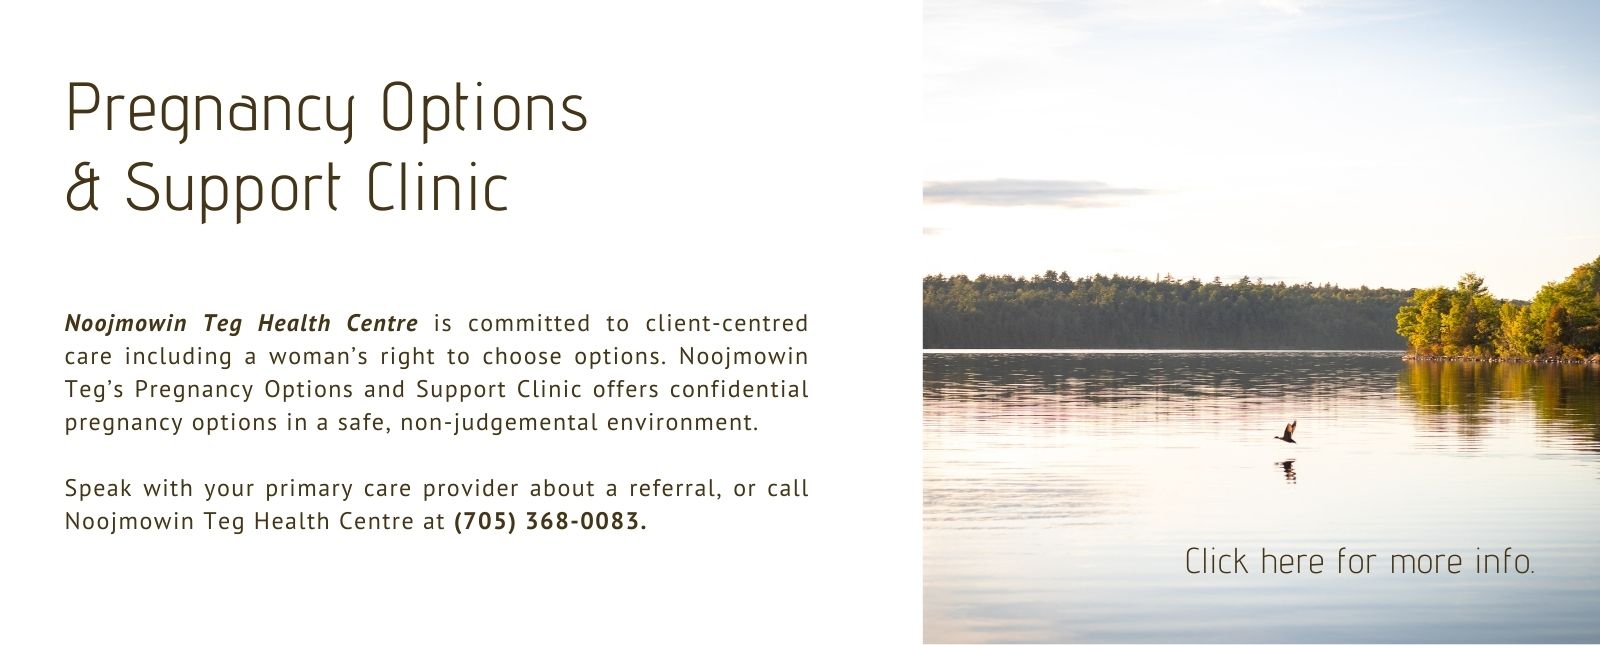 Pregnancy Options Clinic